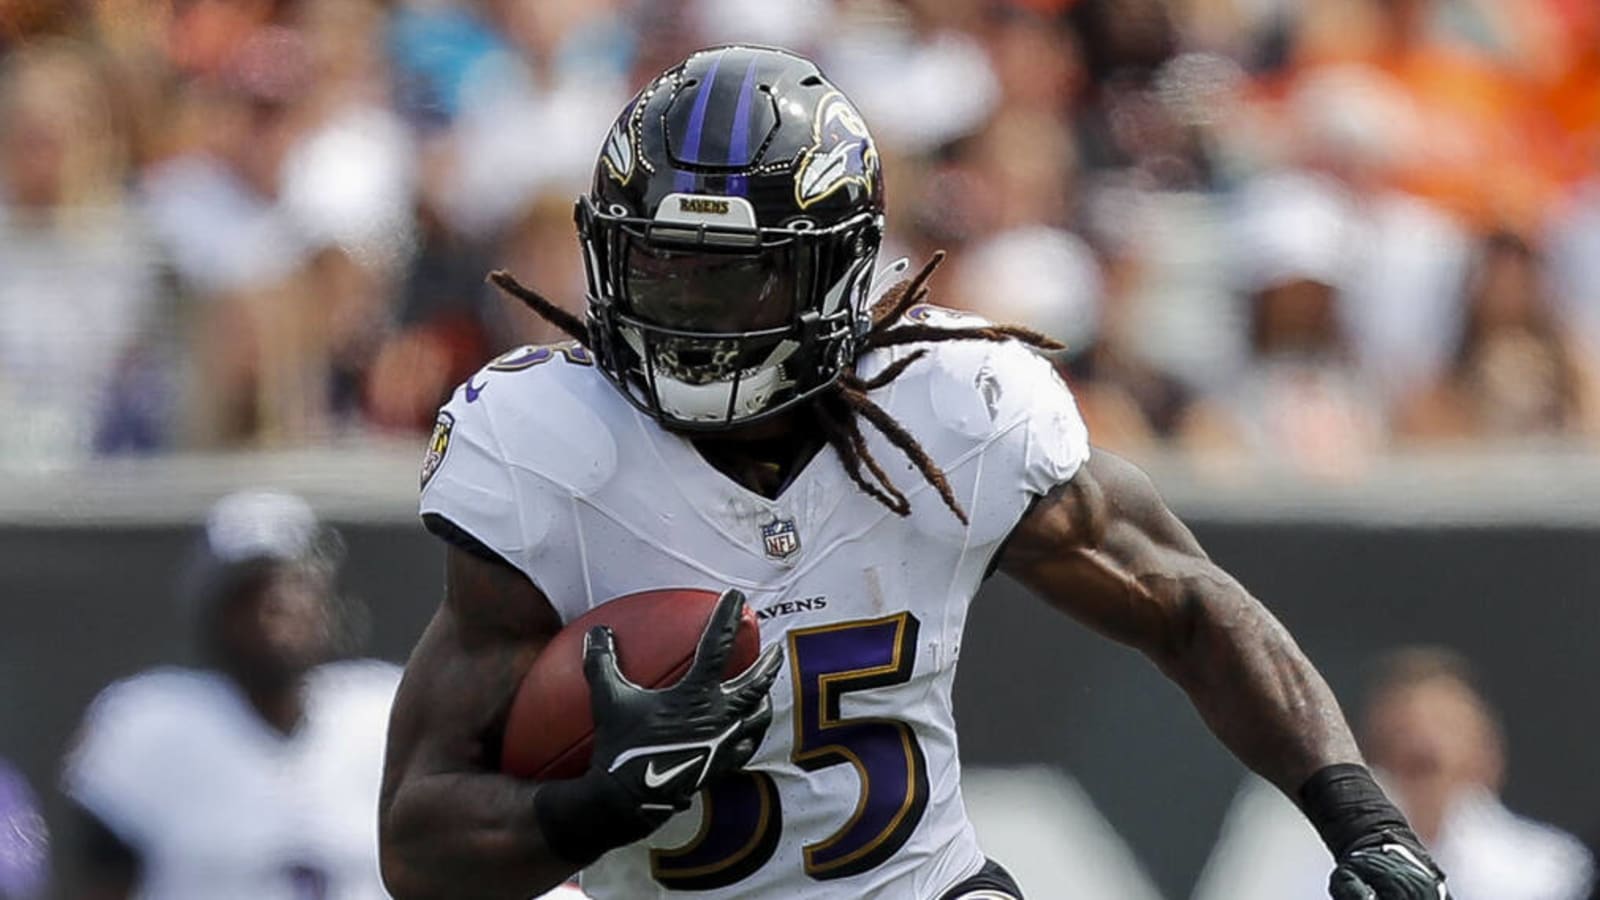 Fantasy ballers: Backup running backs look to beat Week 8 projections